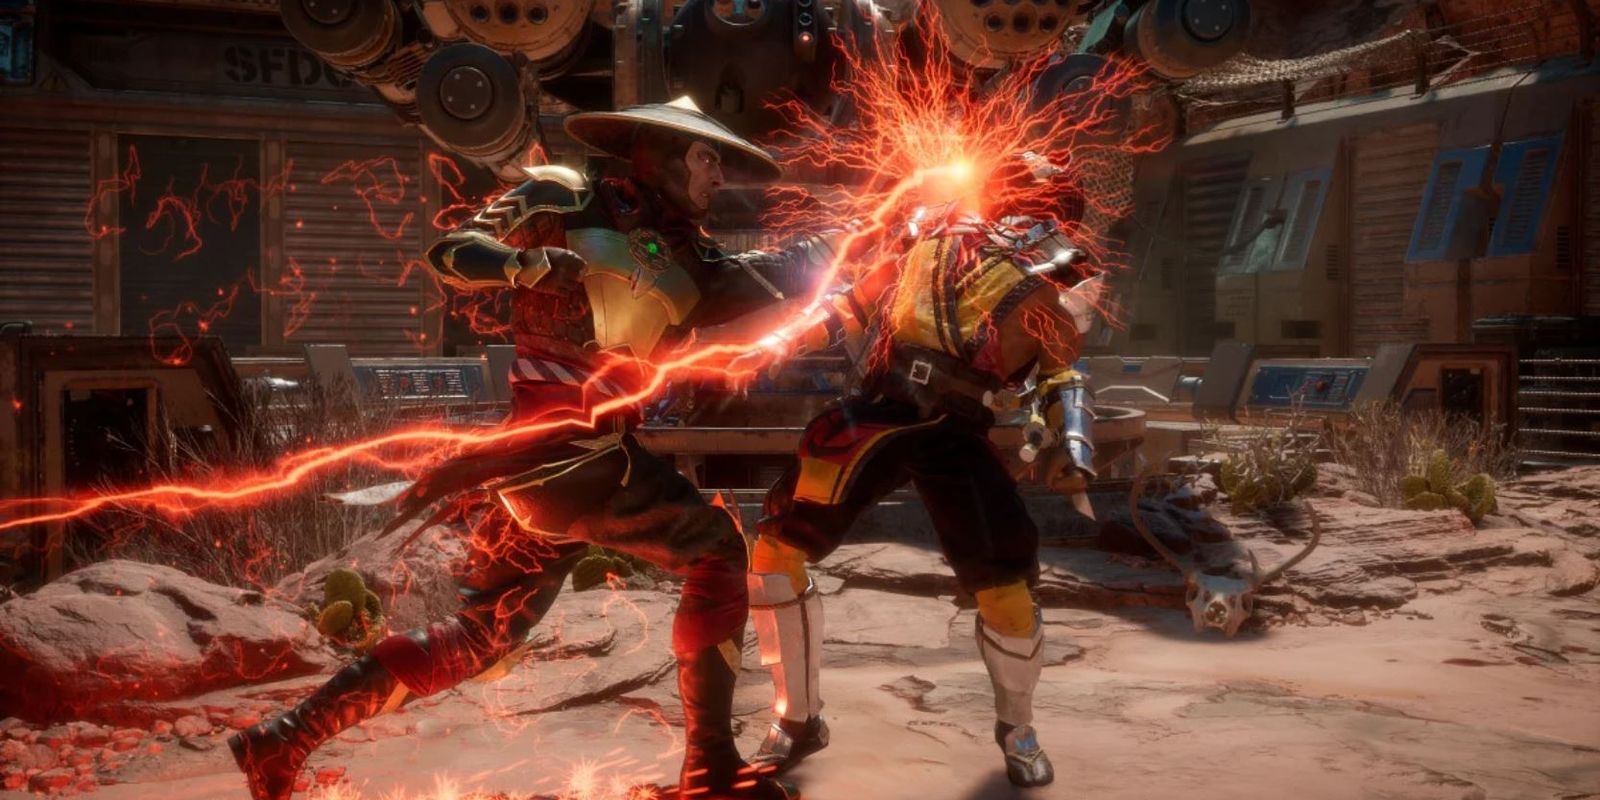 Mortal Kombat 11 fight scene with two characters battling.